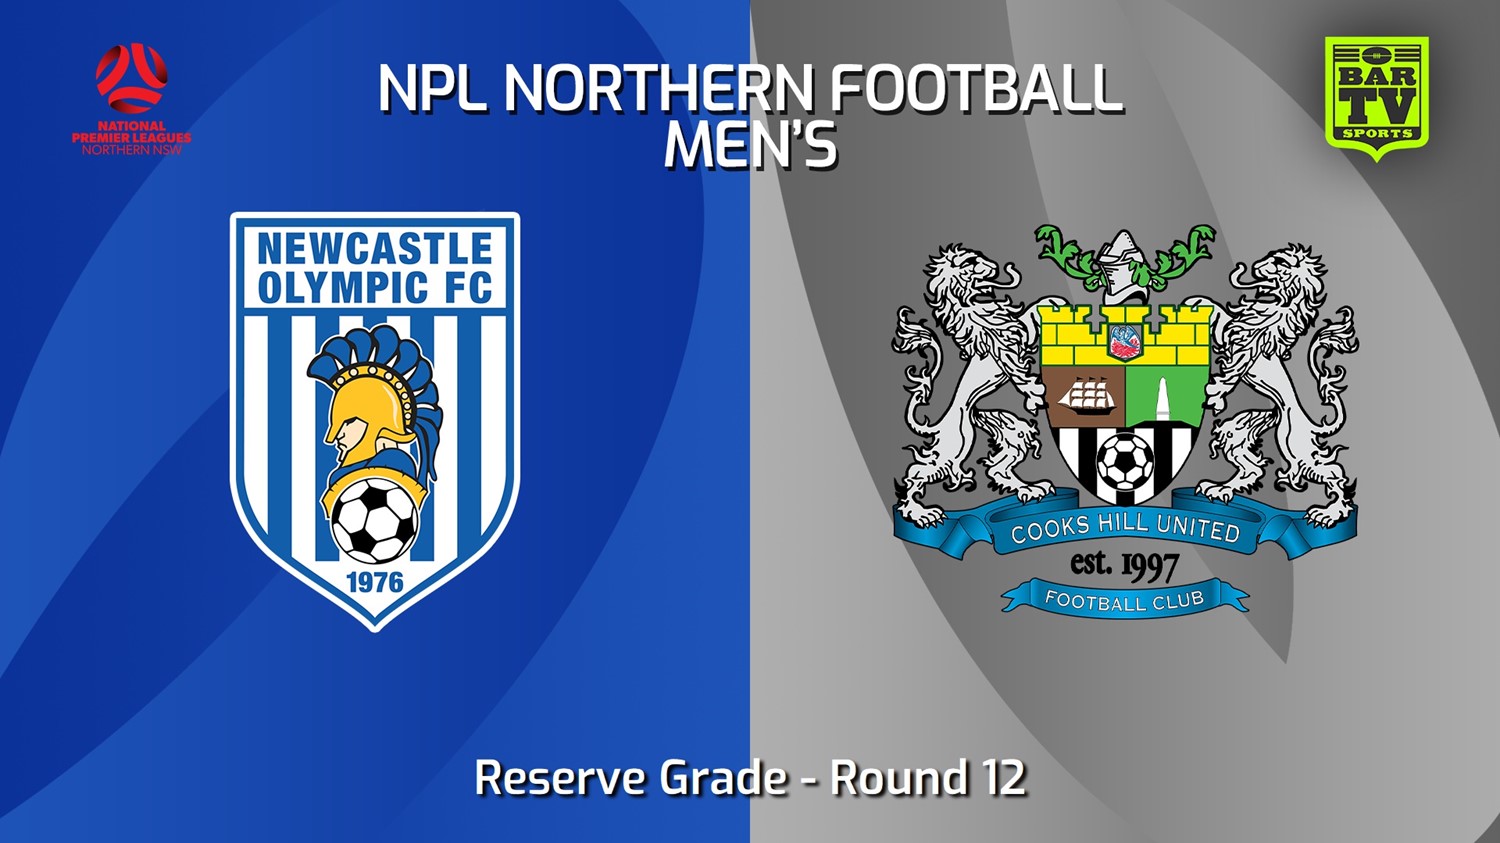 240611-video-NNSW NPLM Res Round 12 - Newcastle Olympic Res v Cooks Hill United FC Res Minigame Slate Image